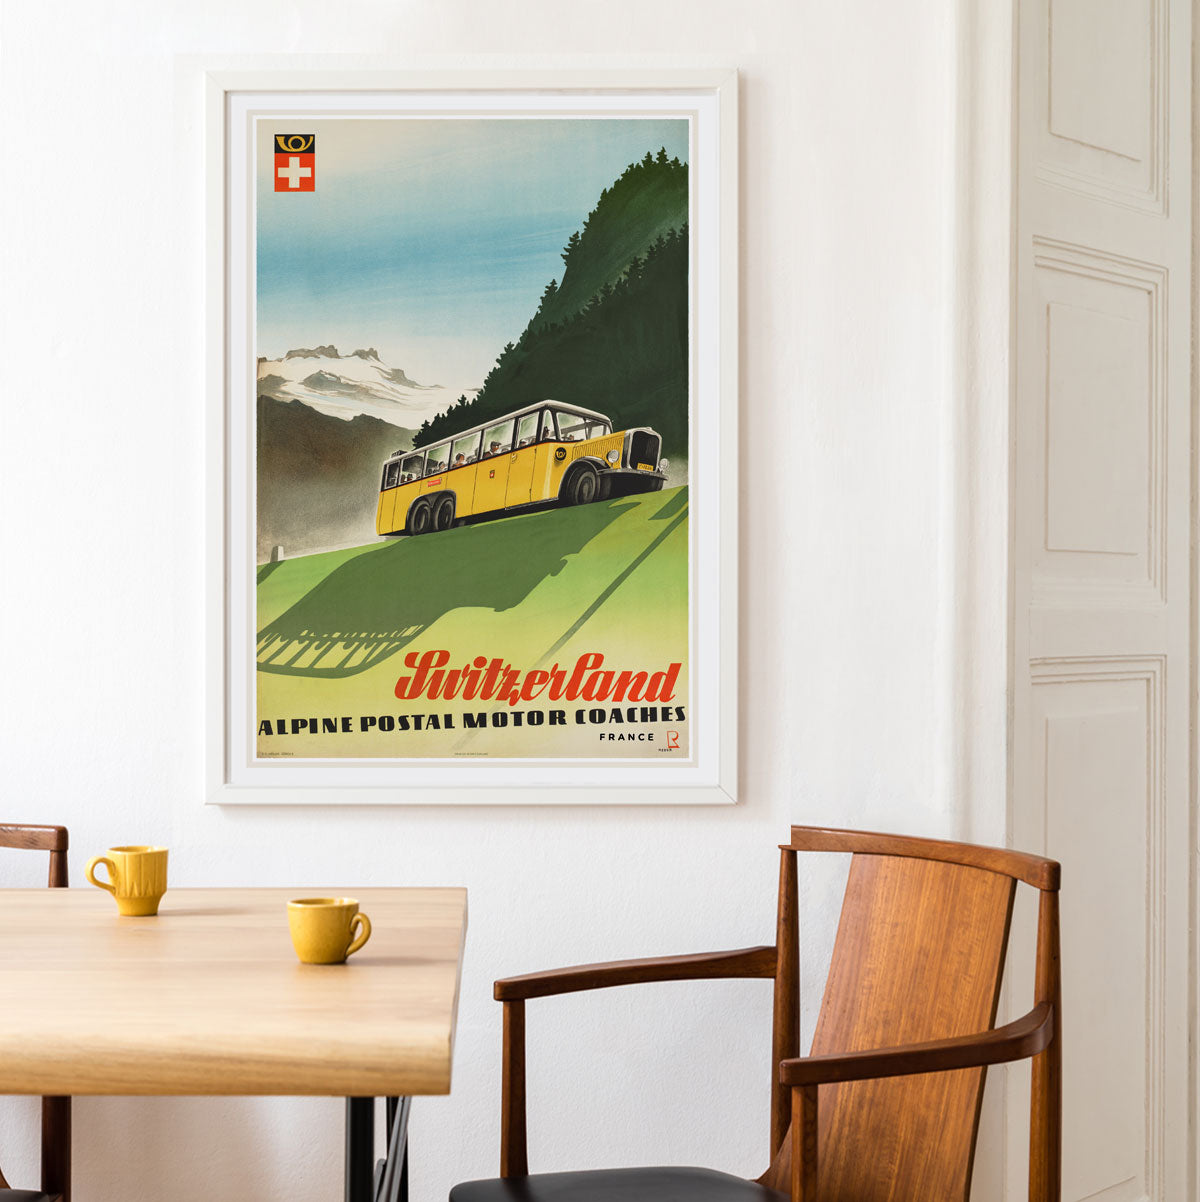 Retro vintage travel Switzerland print from Places We Luv